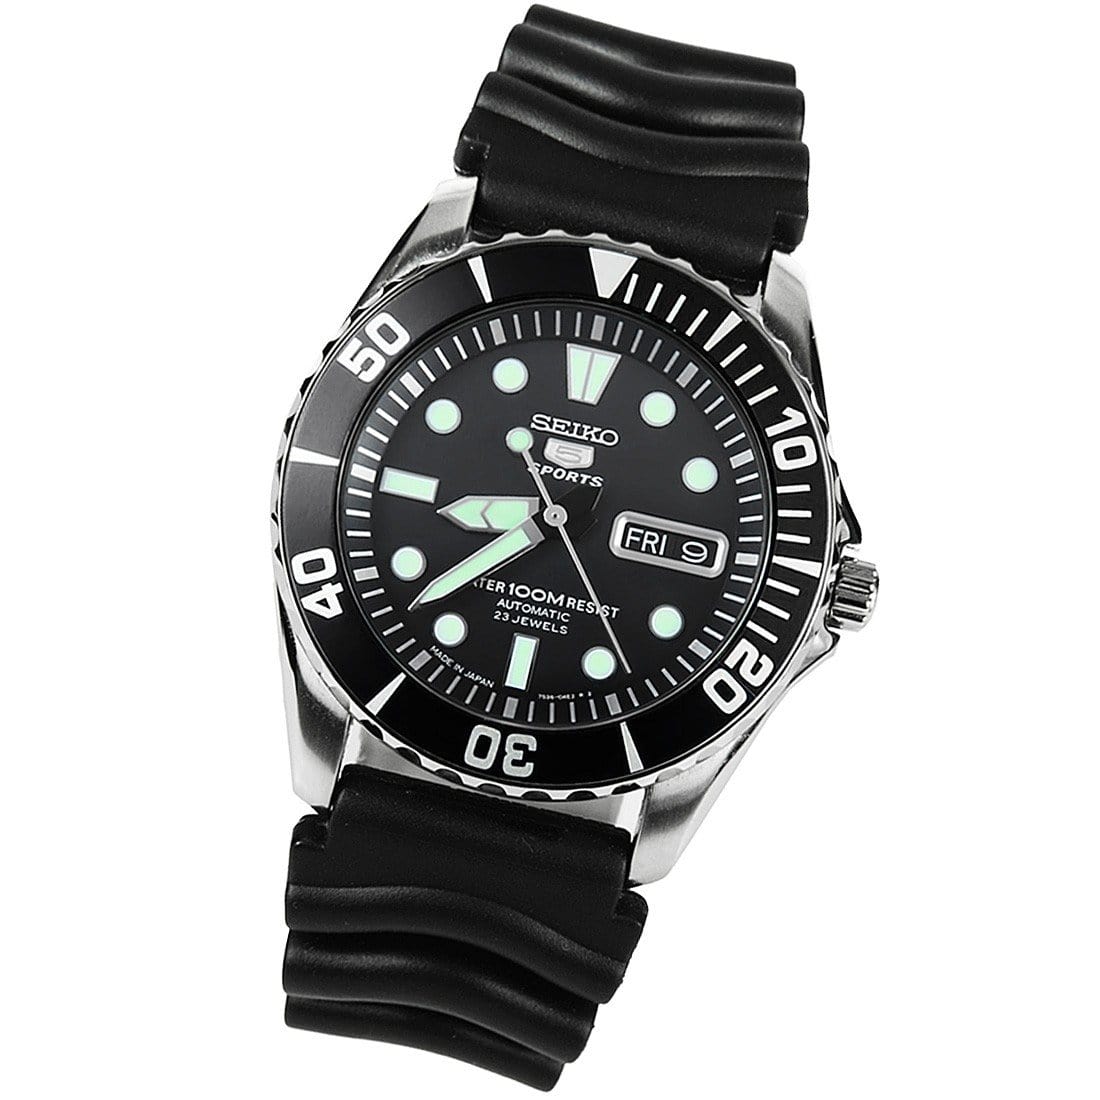 Seiko 5 Sports Automatic Divers Watch SNZF17J SNZF17J2 with Extra Strap